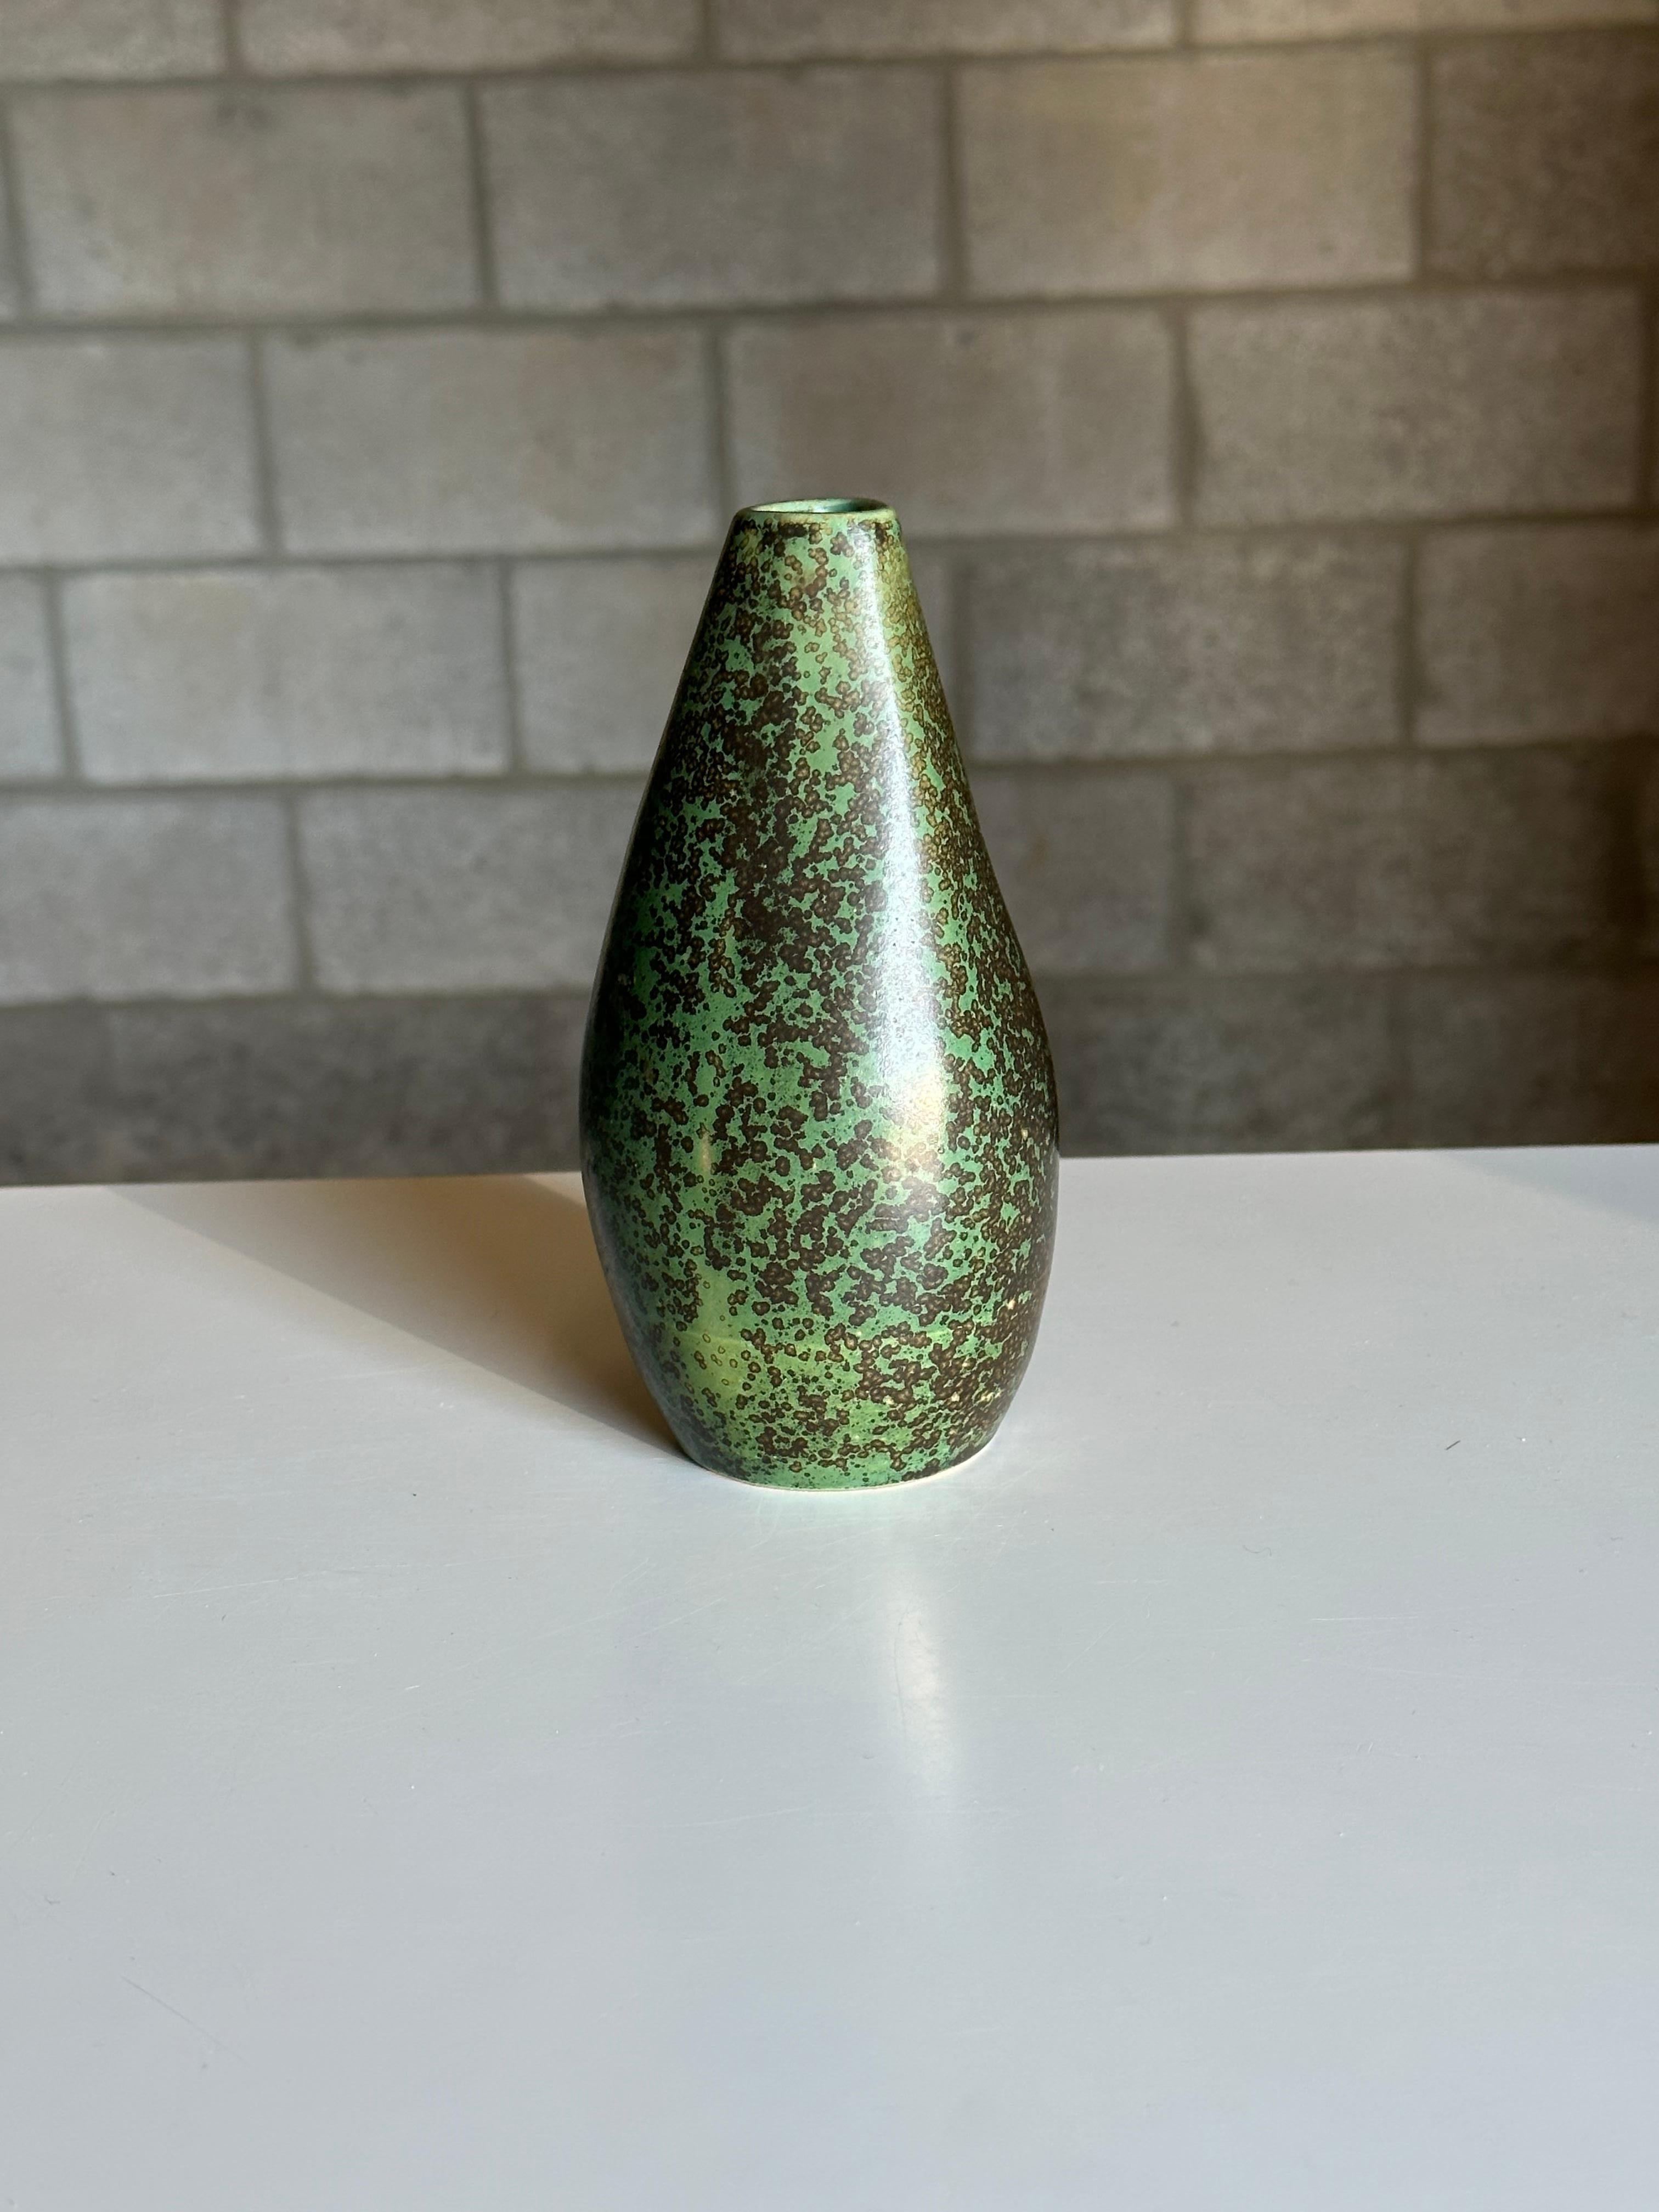 An unusual vase from L. Hjorth, produced in Denmark circa 1950s. Features a wonderful predominately green body with a dark overspray like glaze. Unique shape is rounded towards the bottom and slowly begins to change into a rounded triangle form near